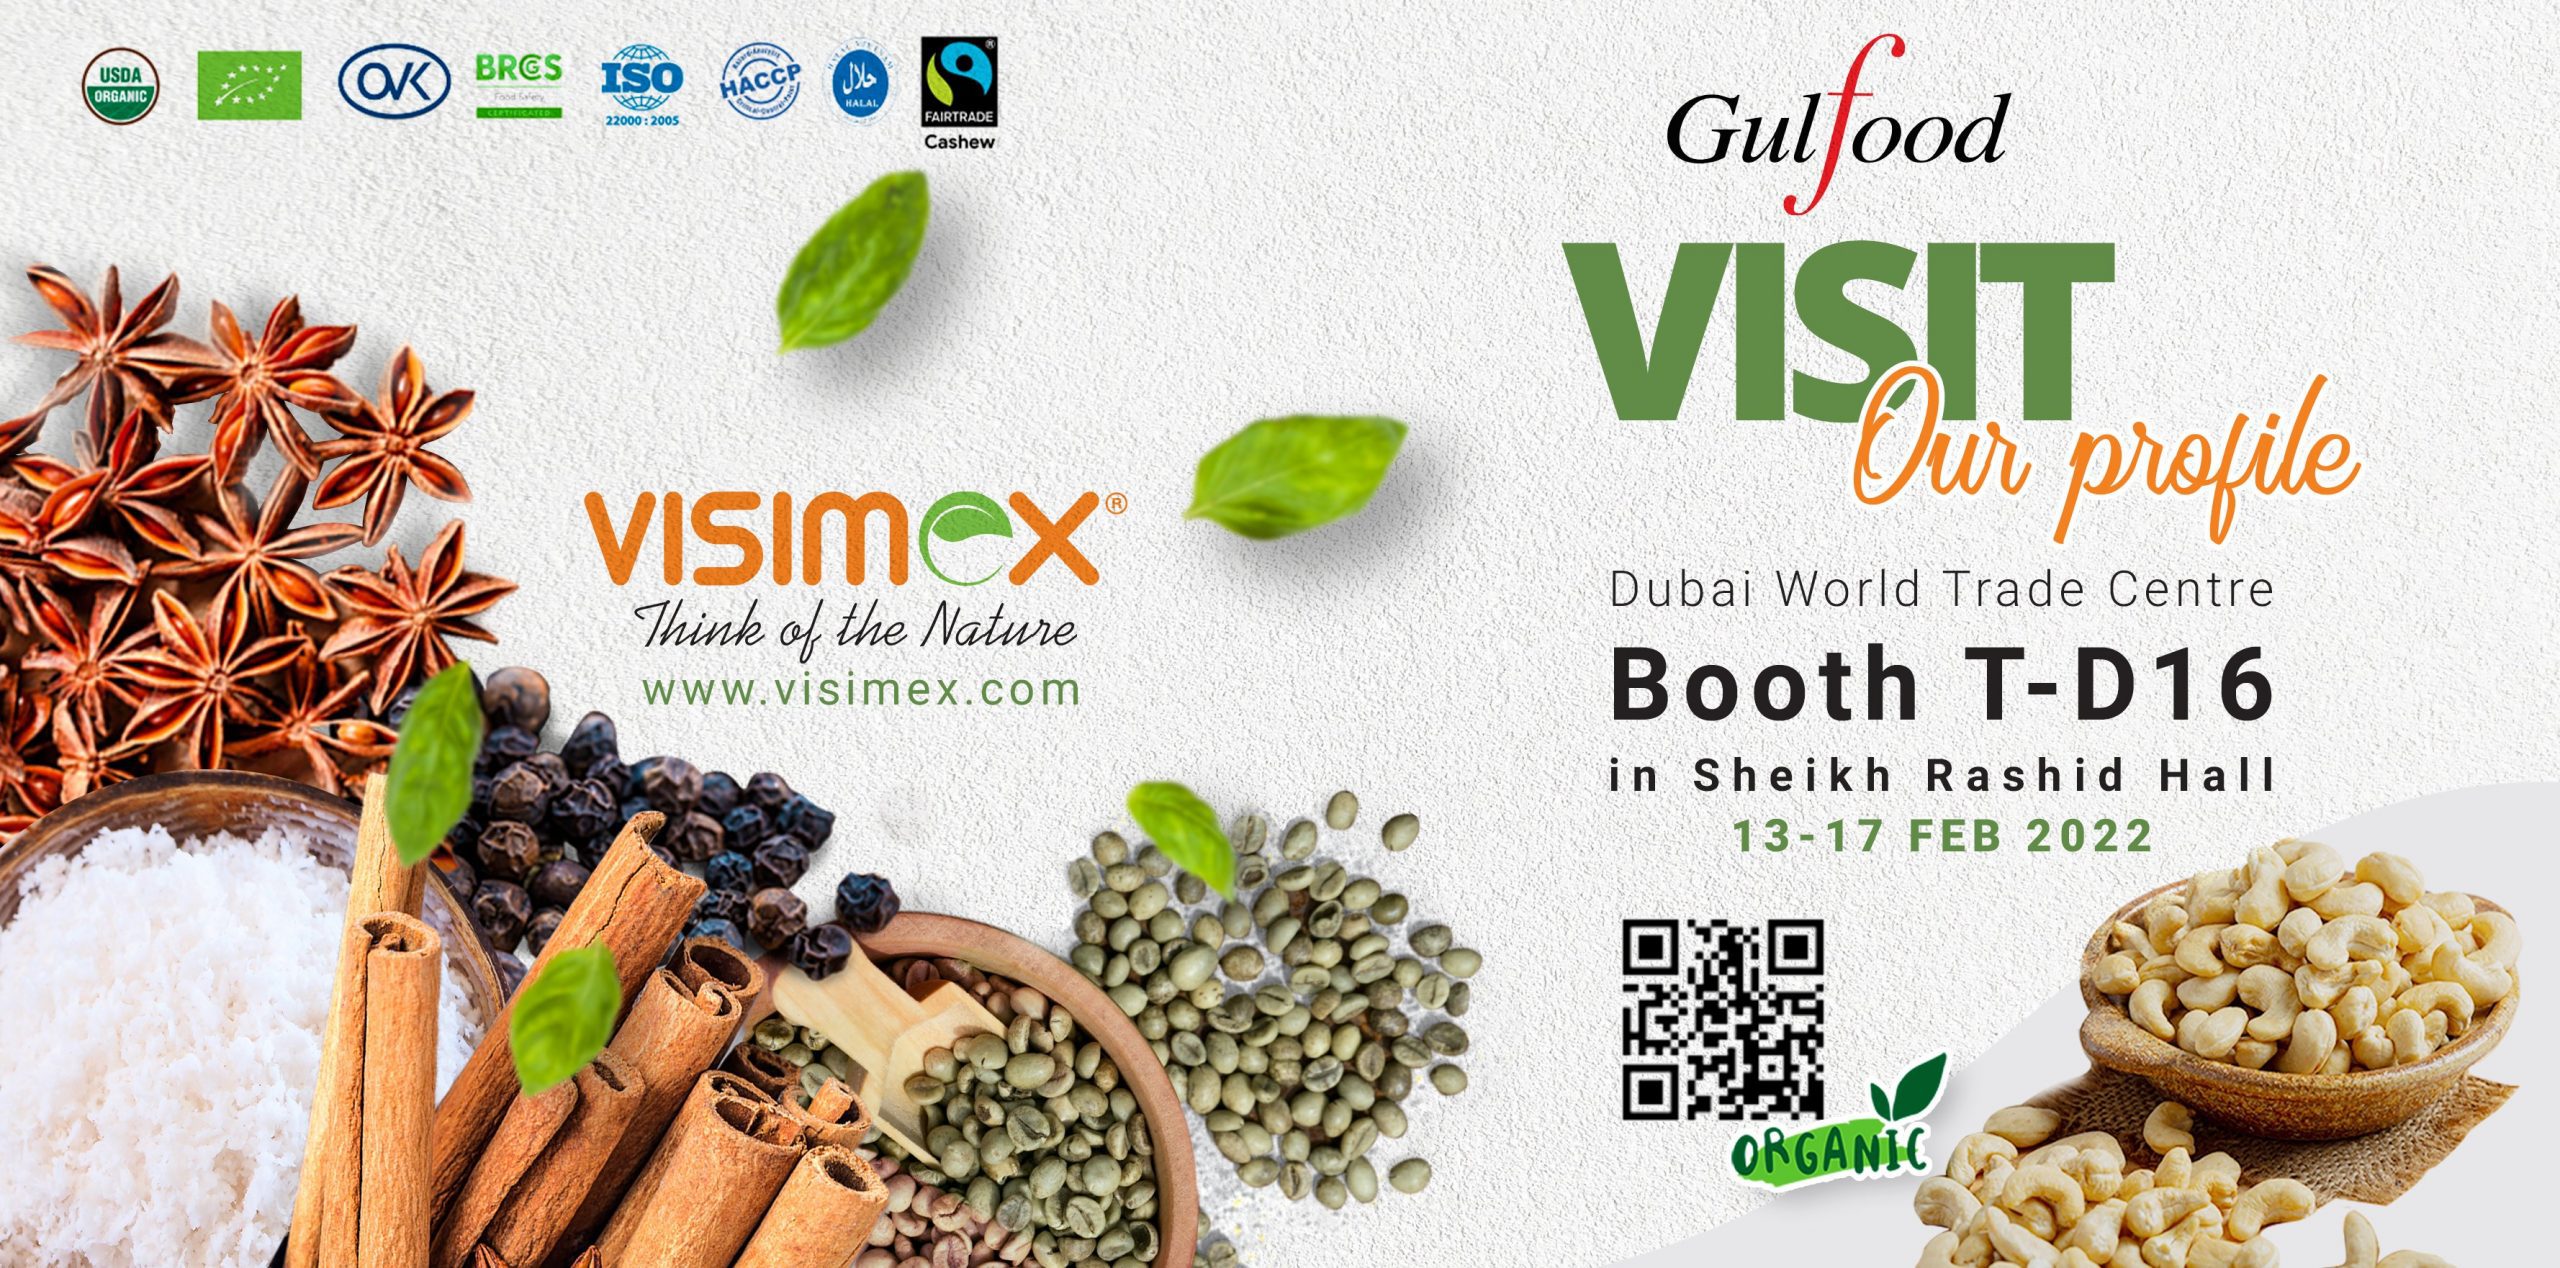 VISIMEX JOIN “THE WORLD'S LARGEST FOOD & BEVERAGES TRADE SHOW